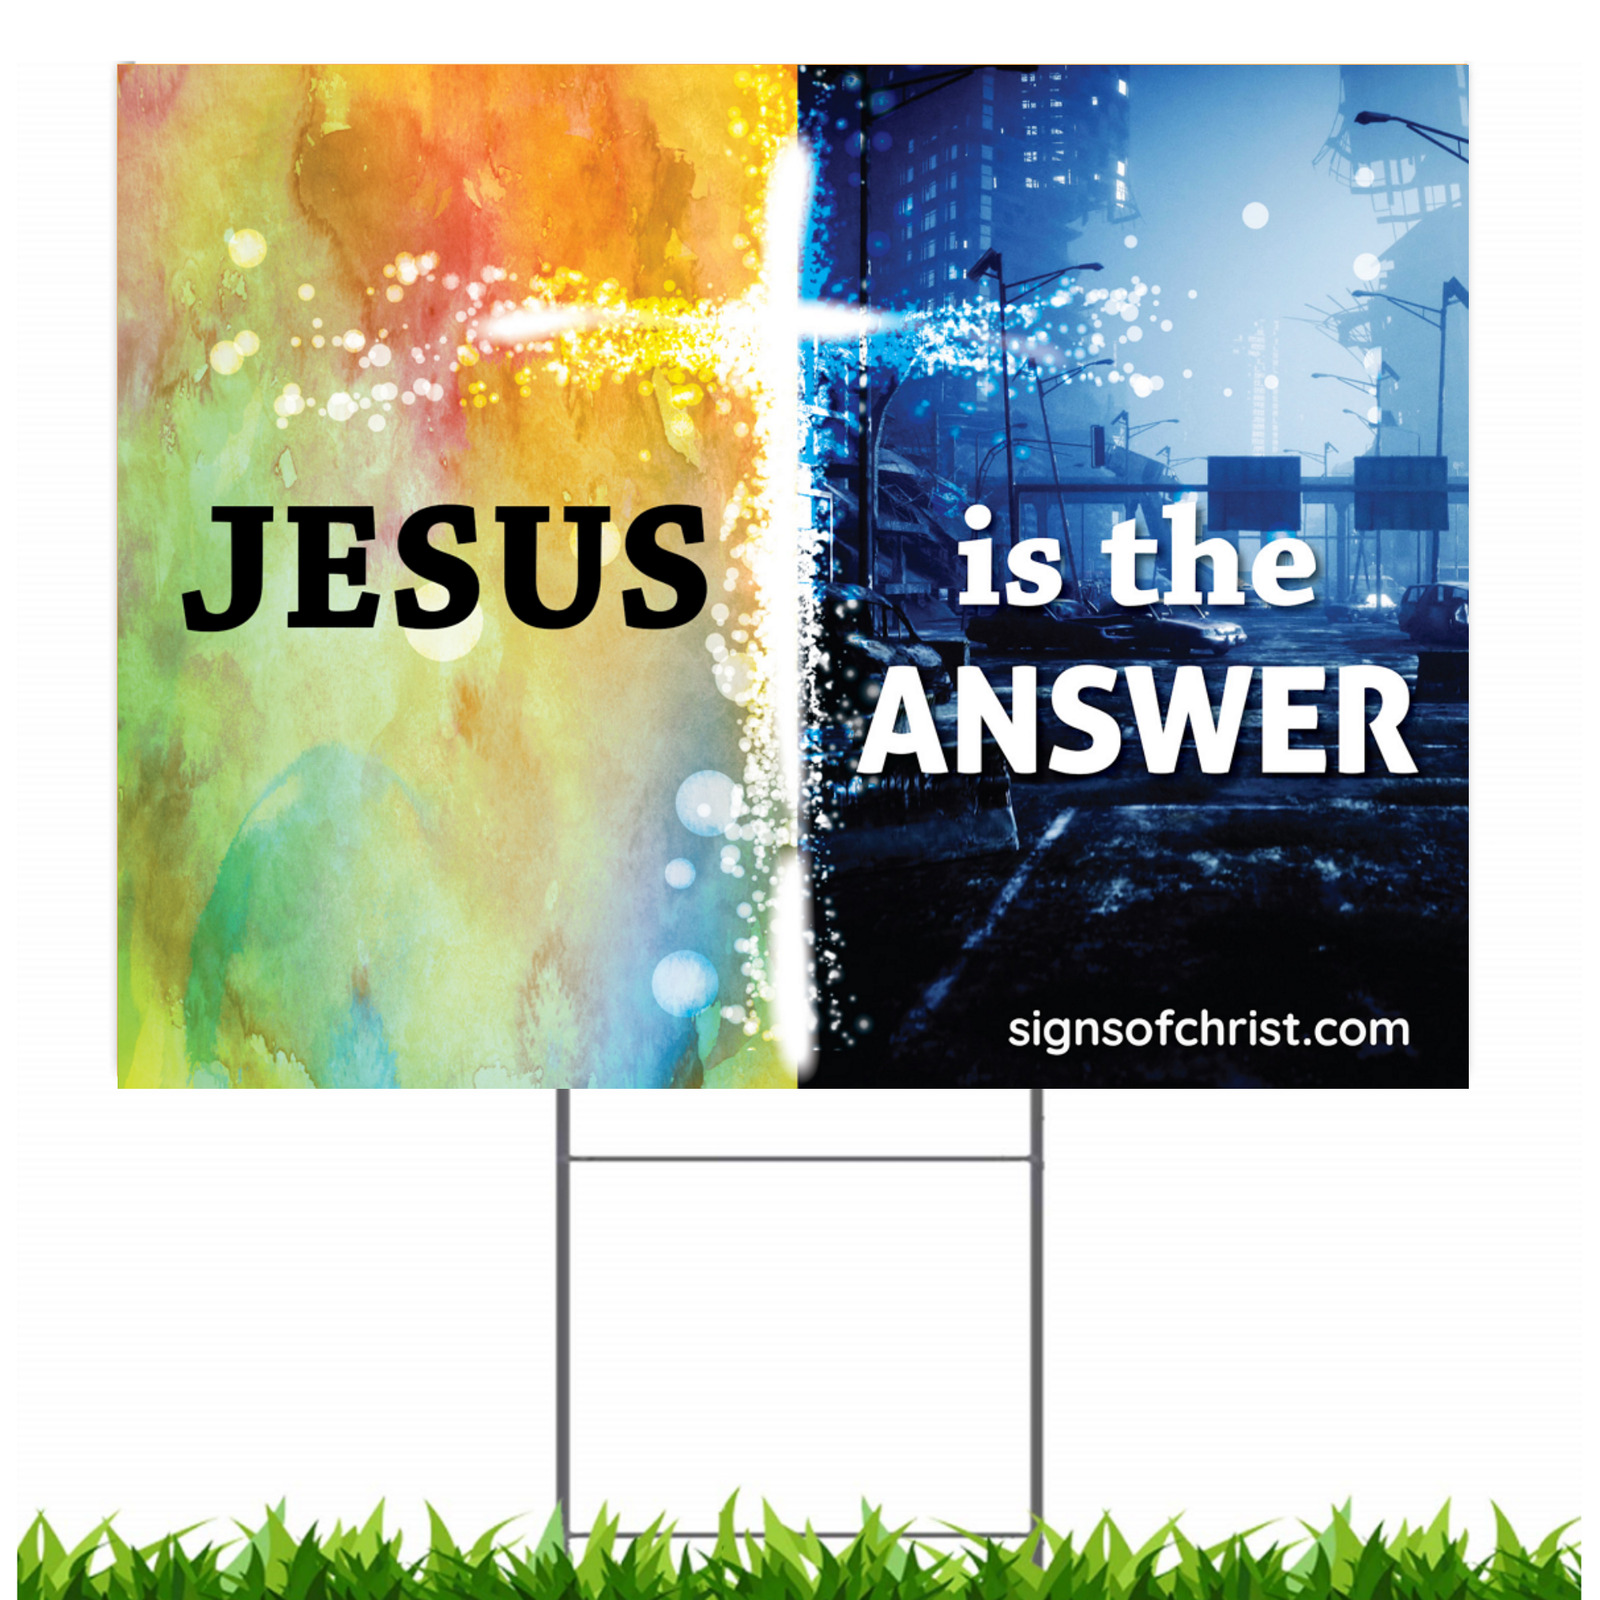 Jesus is the answer 18x24 Single Sided Yard Sign